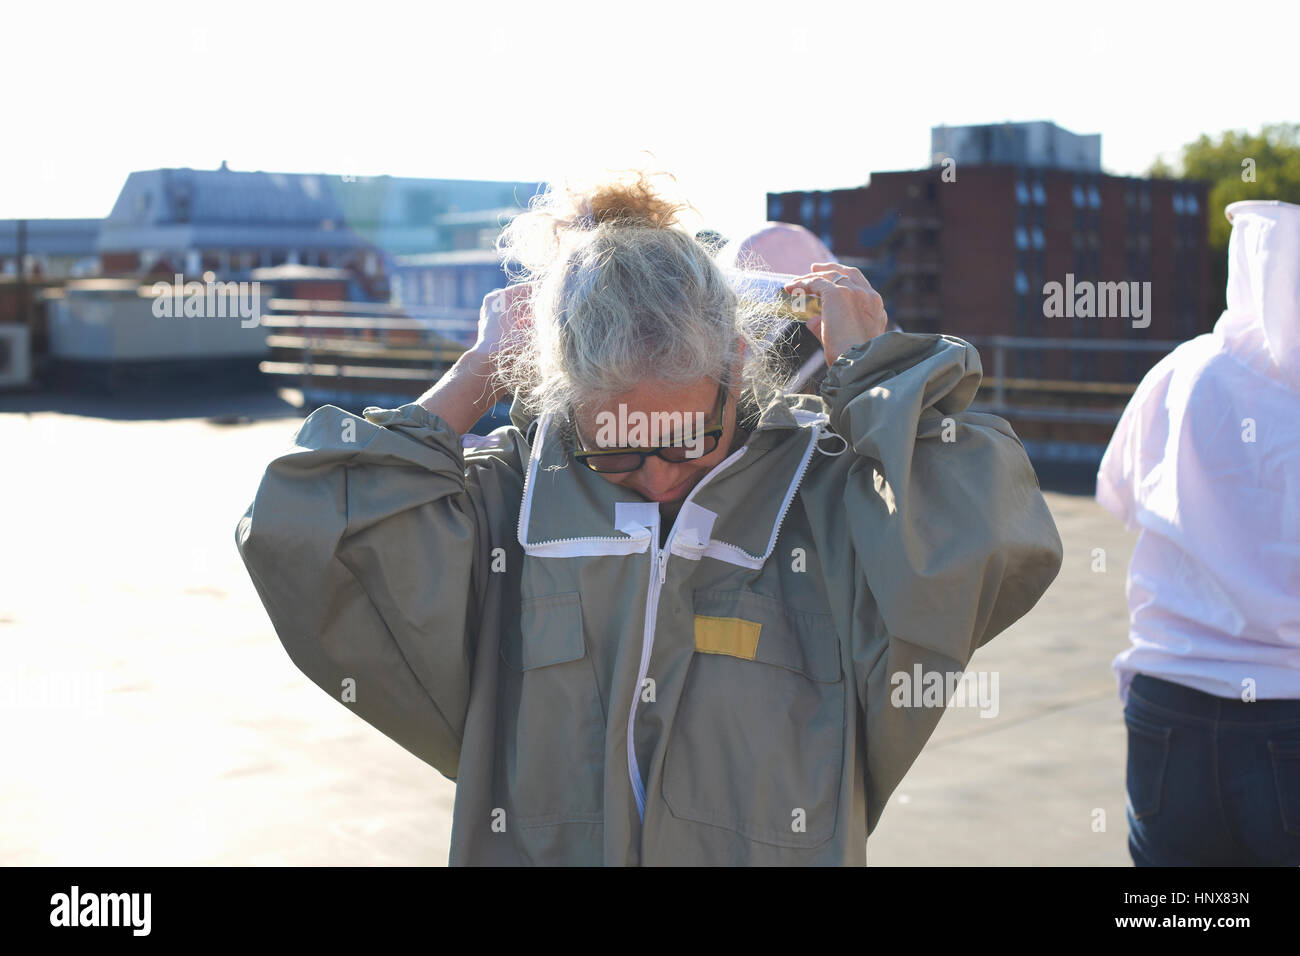 Female beekeeper putting on protective clothes on city rooftop Stock Photo